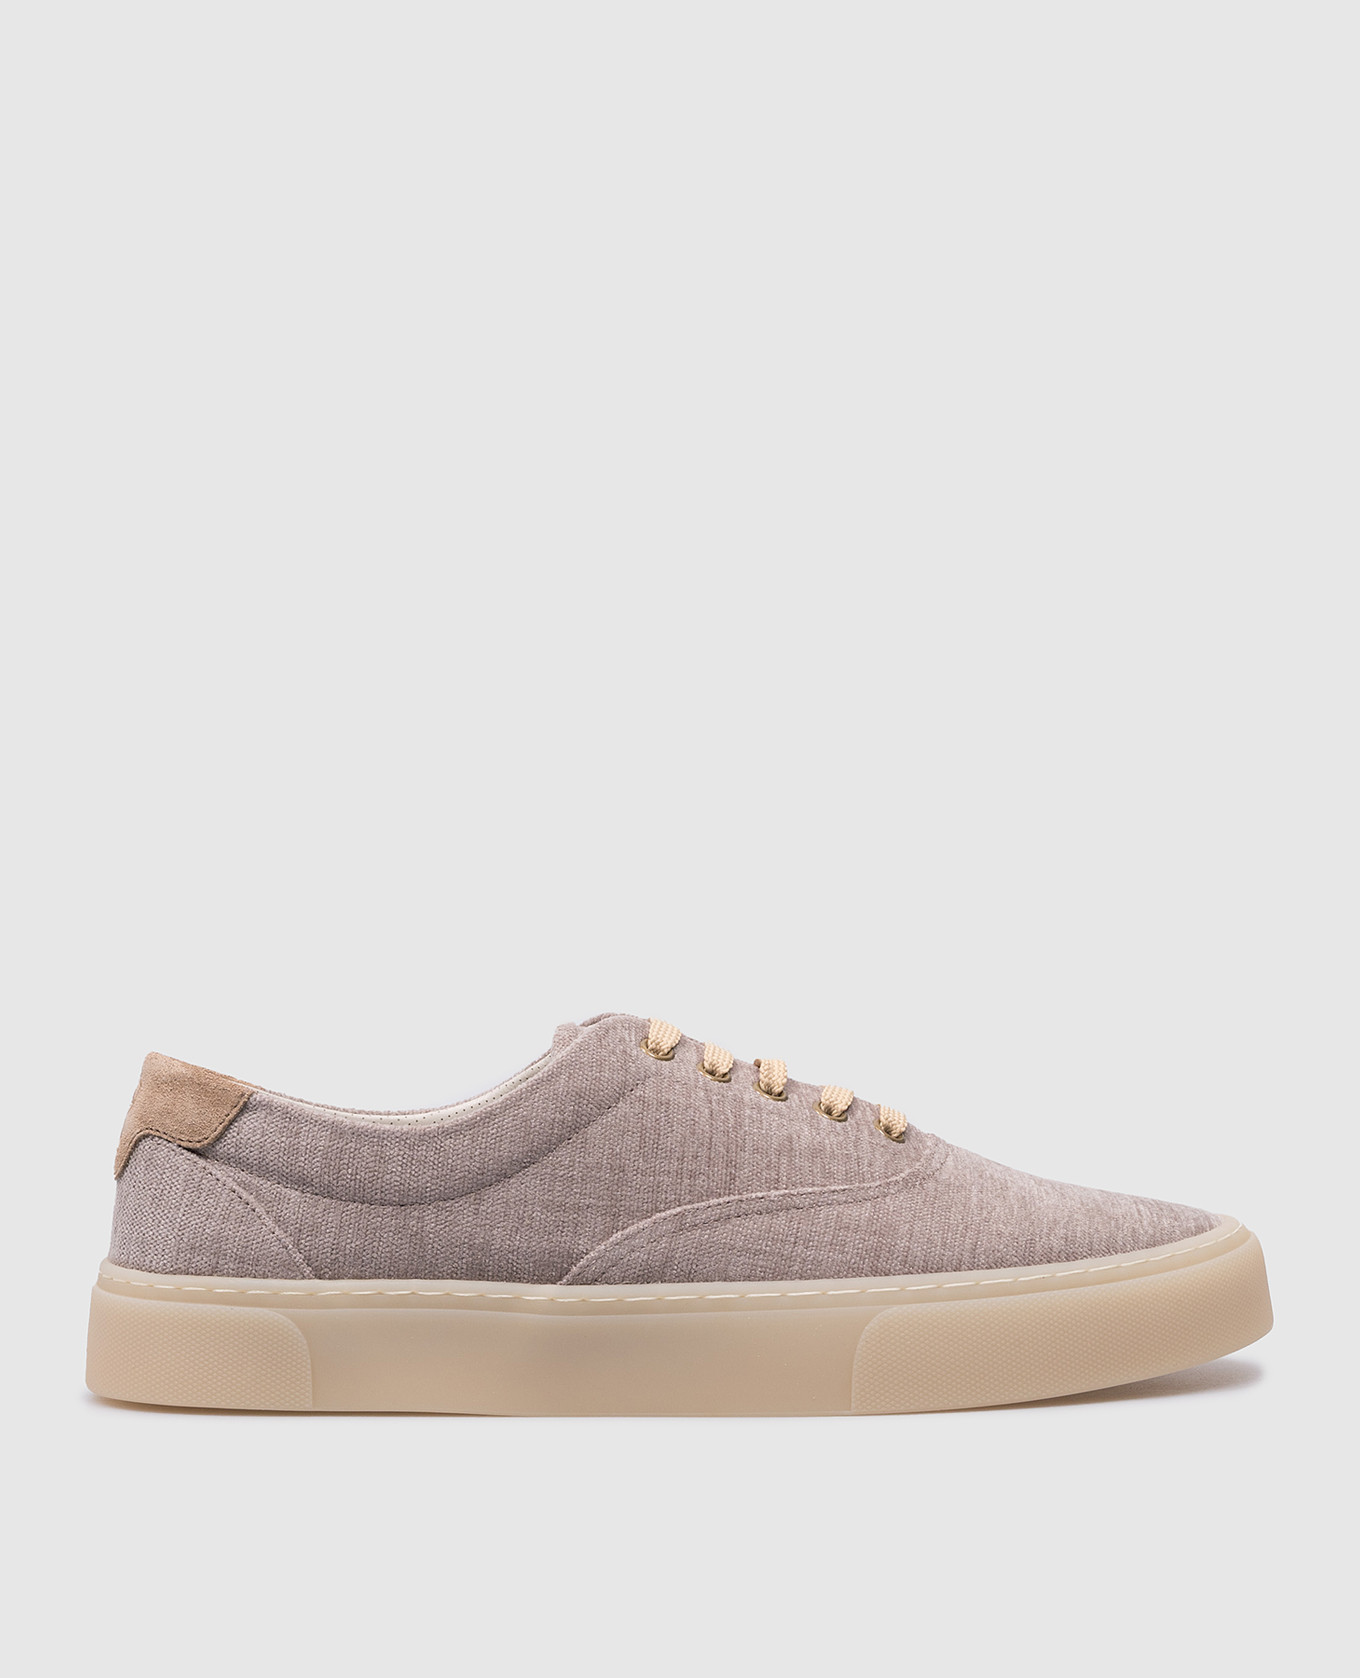 Beige sneakers with a logo